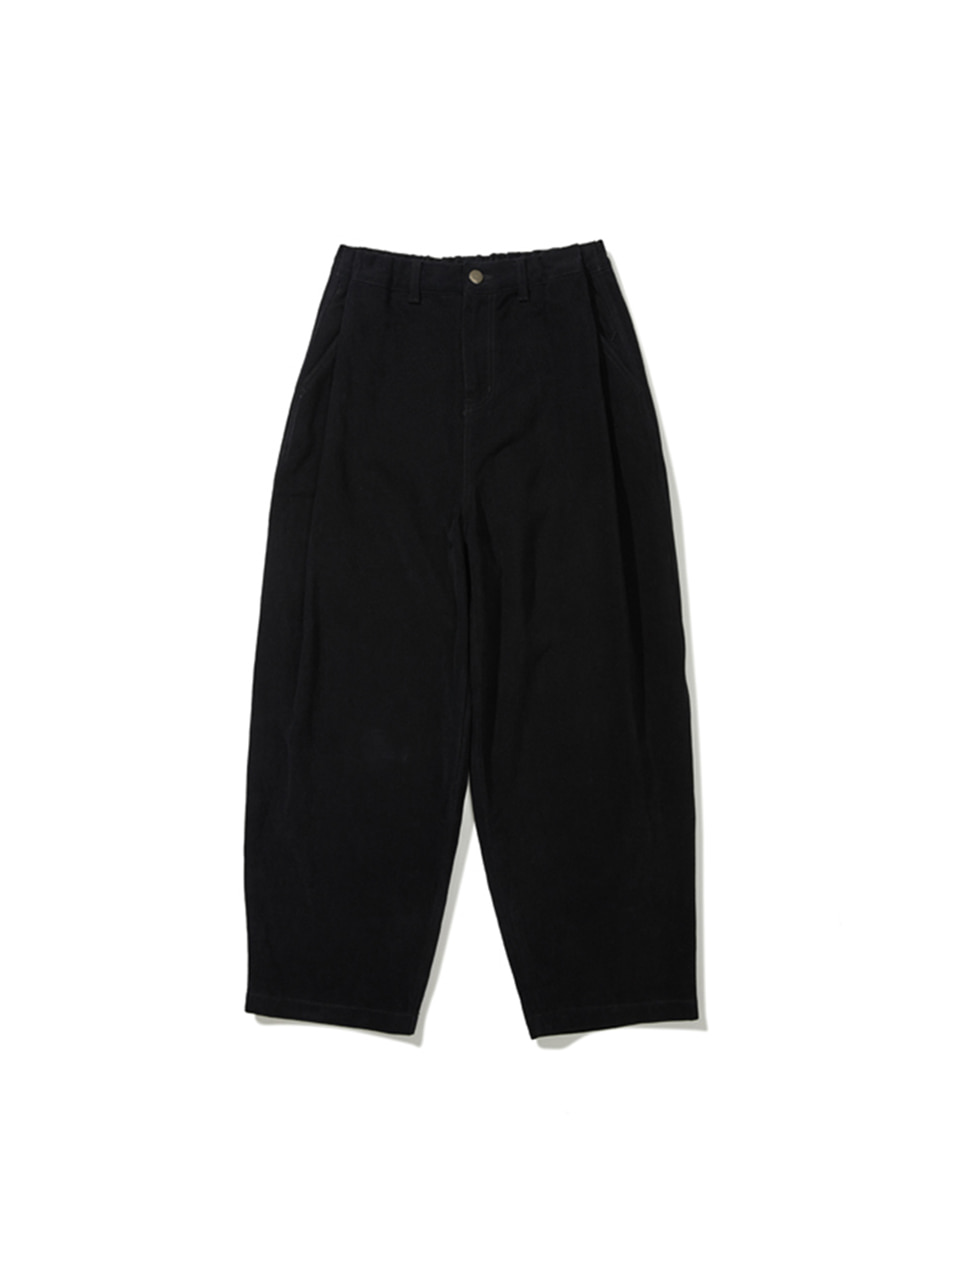 SOUNDSLIFE - New Balloon Snap Pants For FW Charcoal